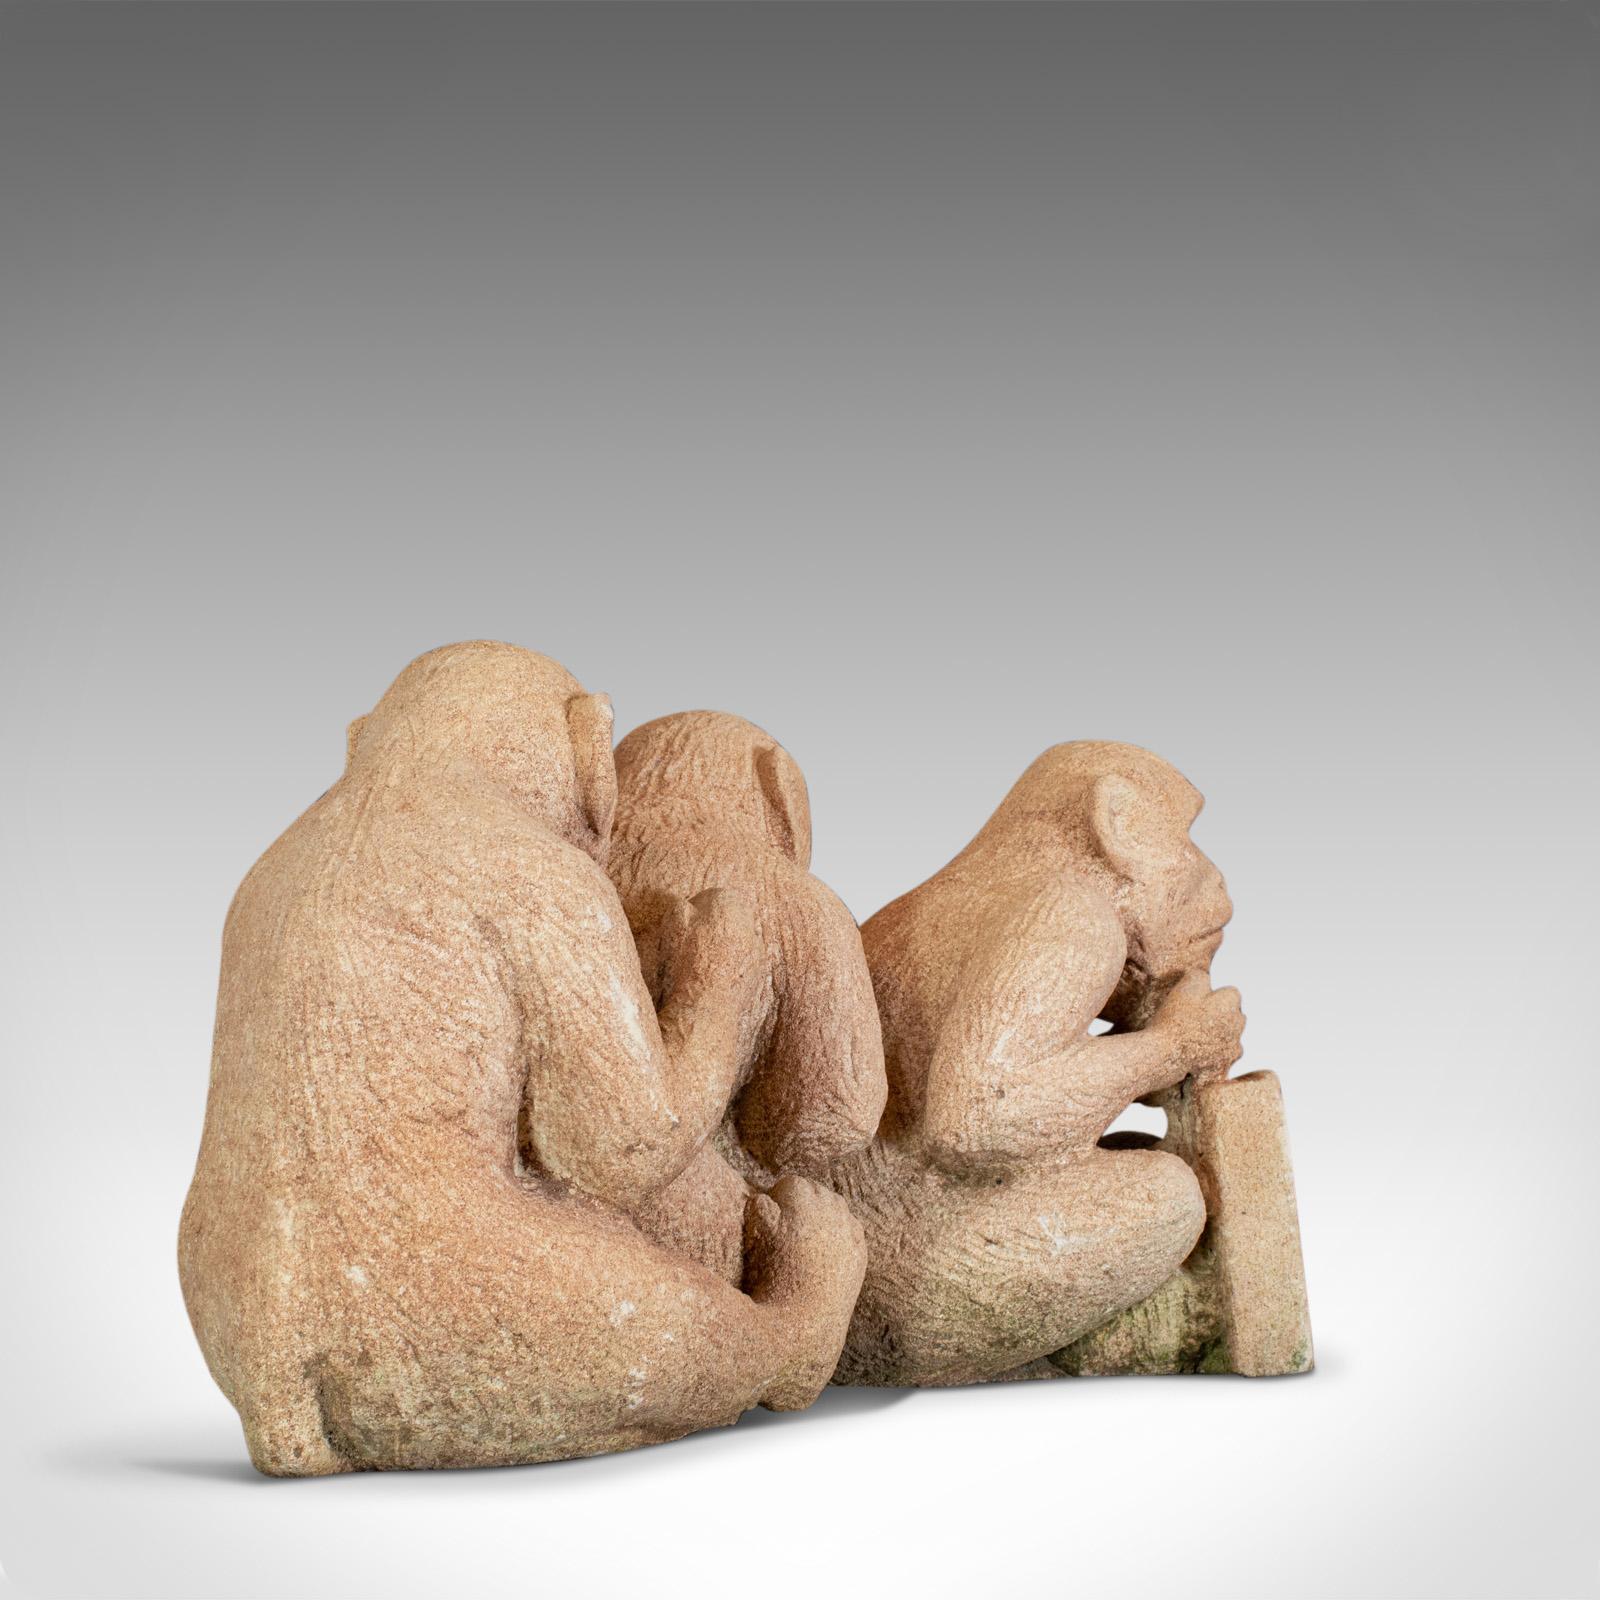 Sculpture of Sitting Macaques, English, Bath Stone, Dominic Hurley In New Condition For Sale In Hele, Devon, GB